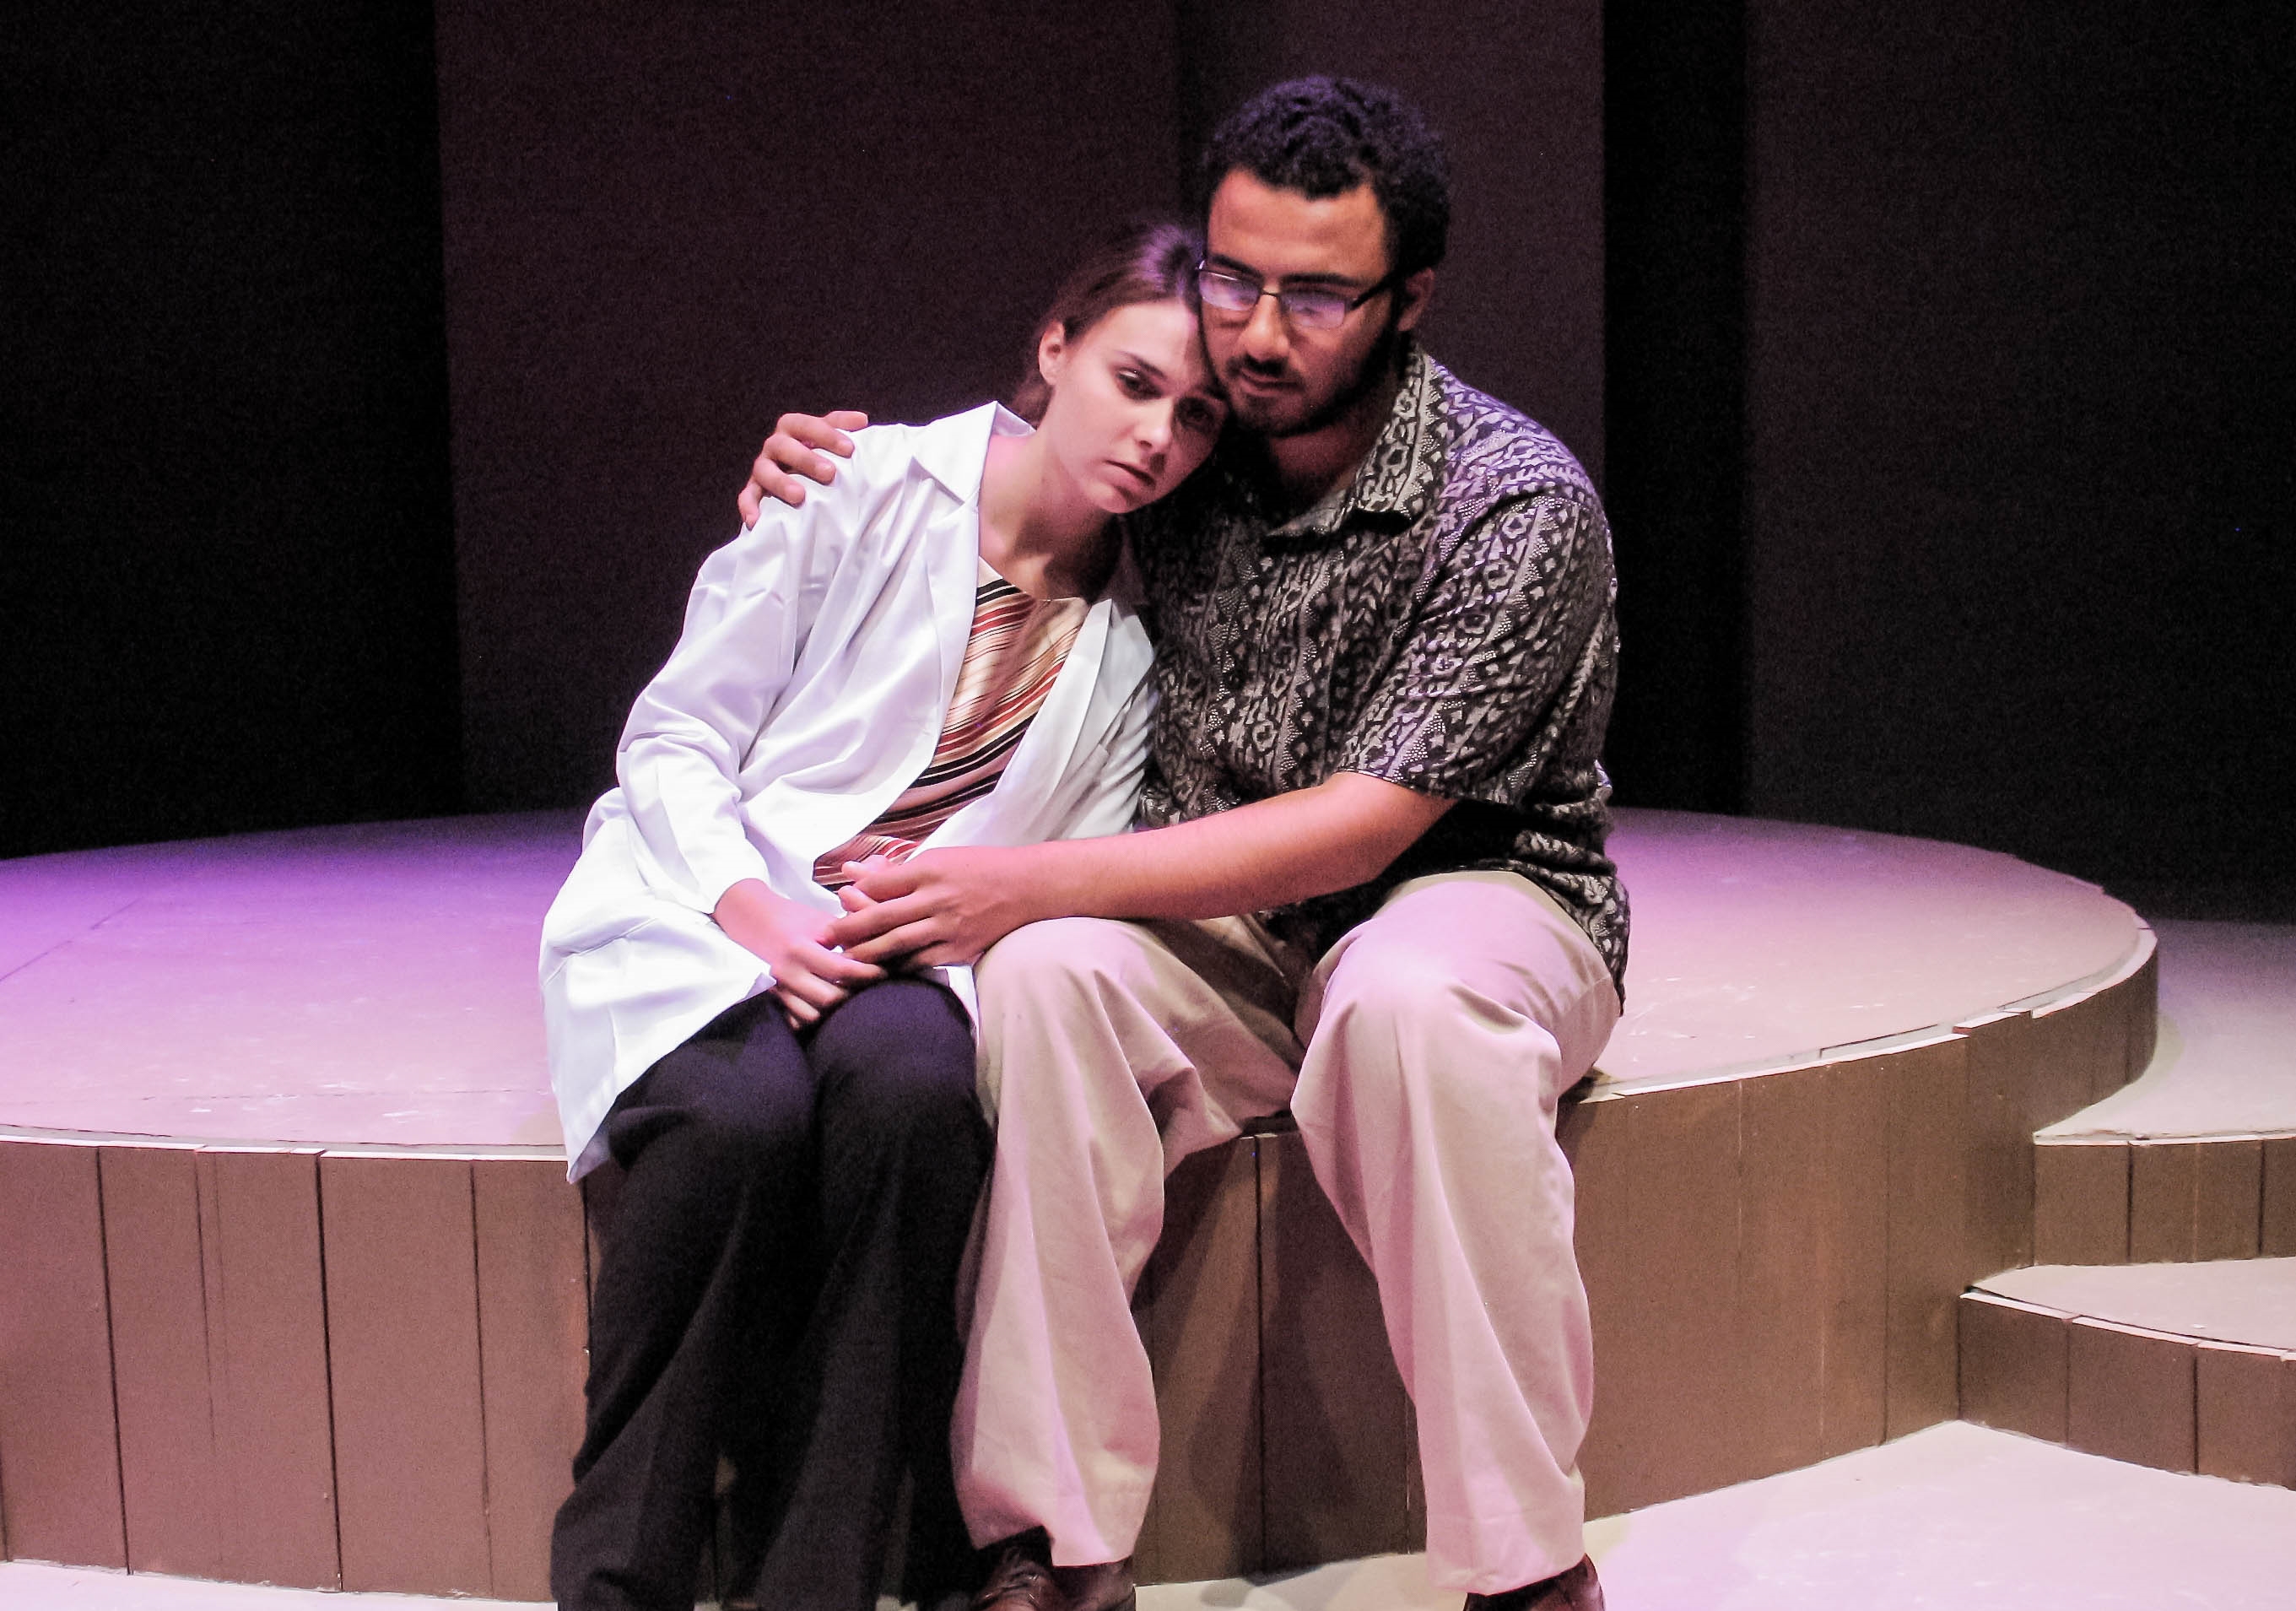 Mount Union students performing on stage in Informed Consent